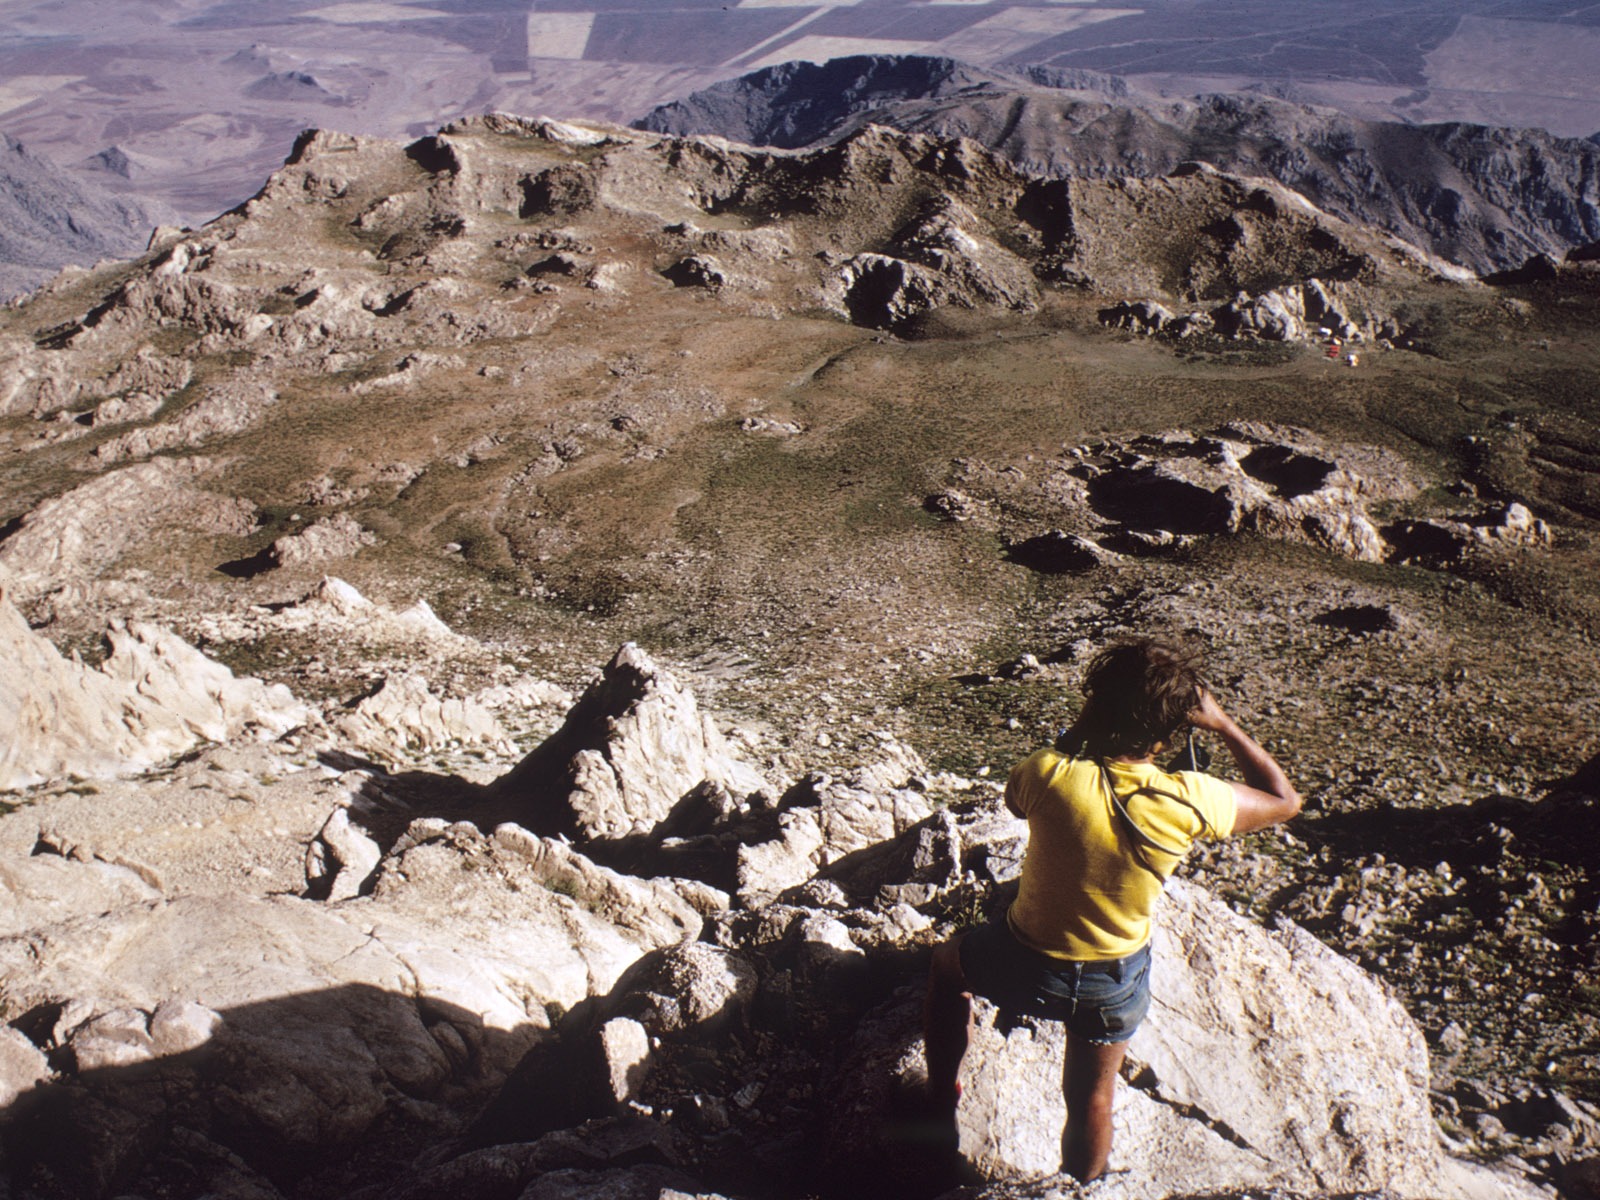 The Parau basin, seen from top of mountain, camp on far right (John Whalley)